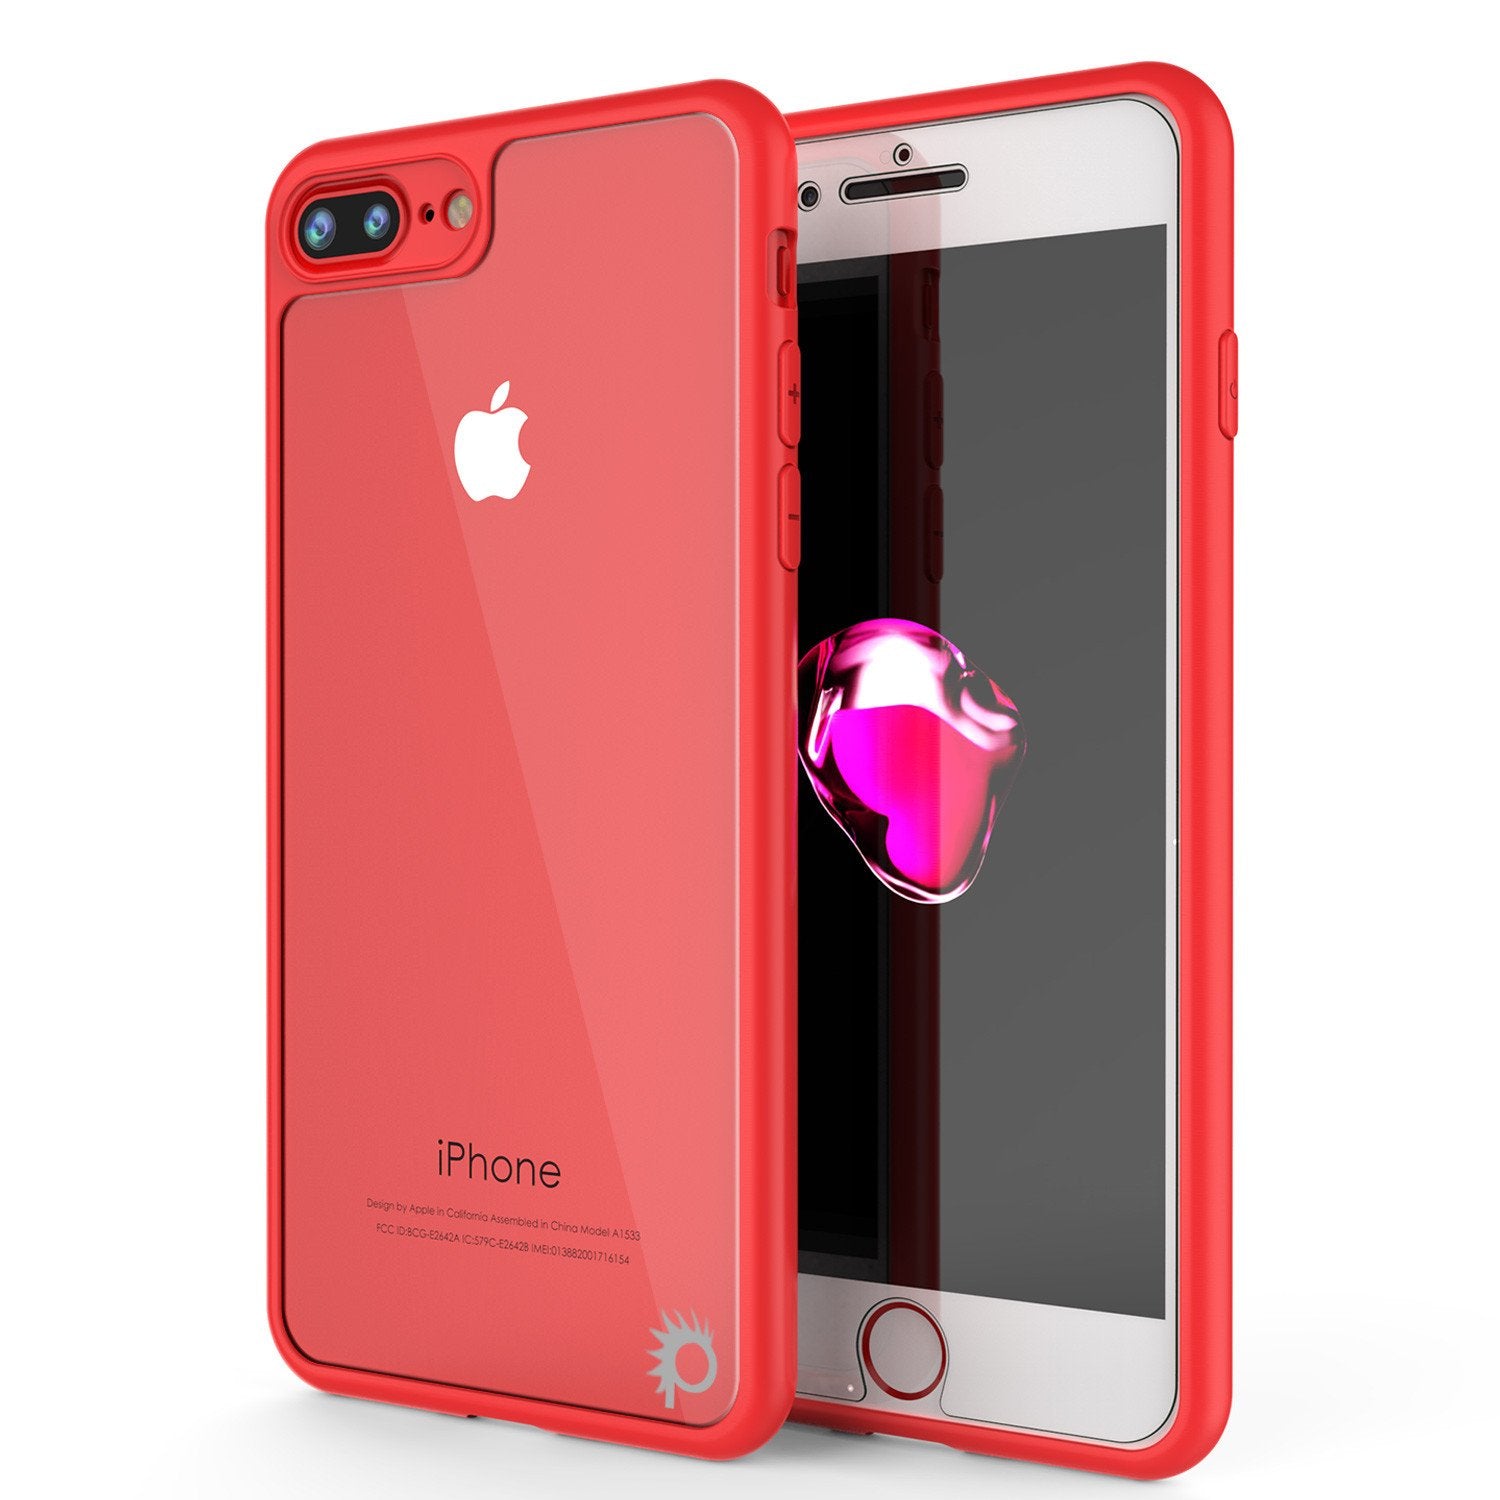 iPhone 7+ Plus Case [MASK Series] [RED] Full Body Hybrid Dual Layer TPU Cover W/ protective Tempered Glass Screen Protector